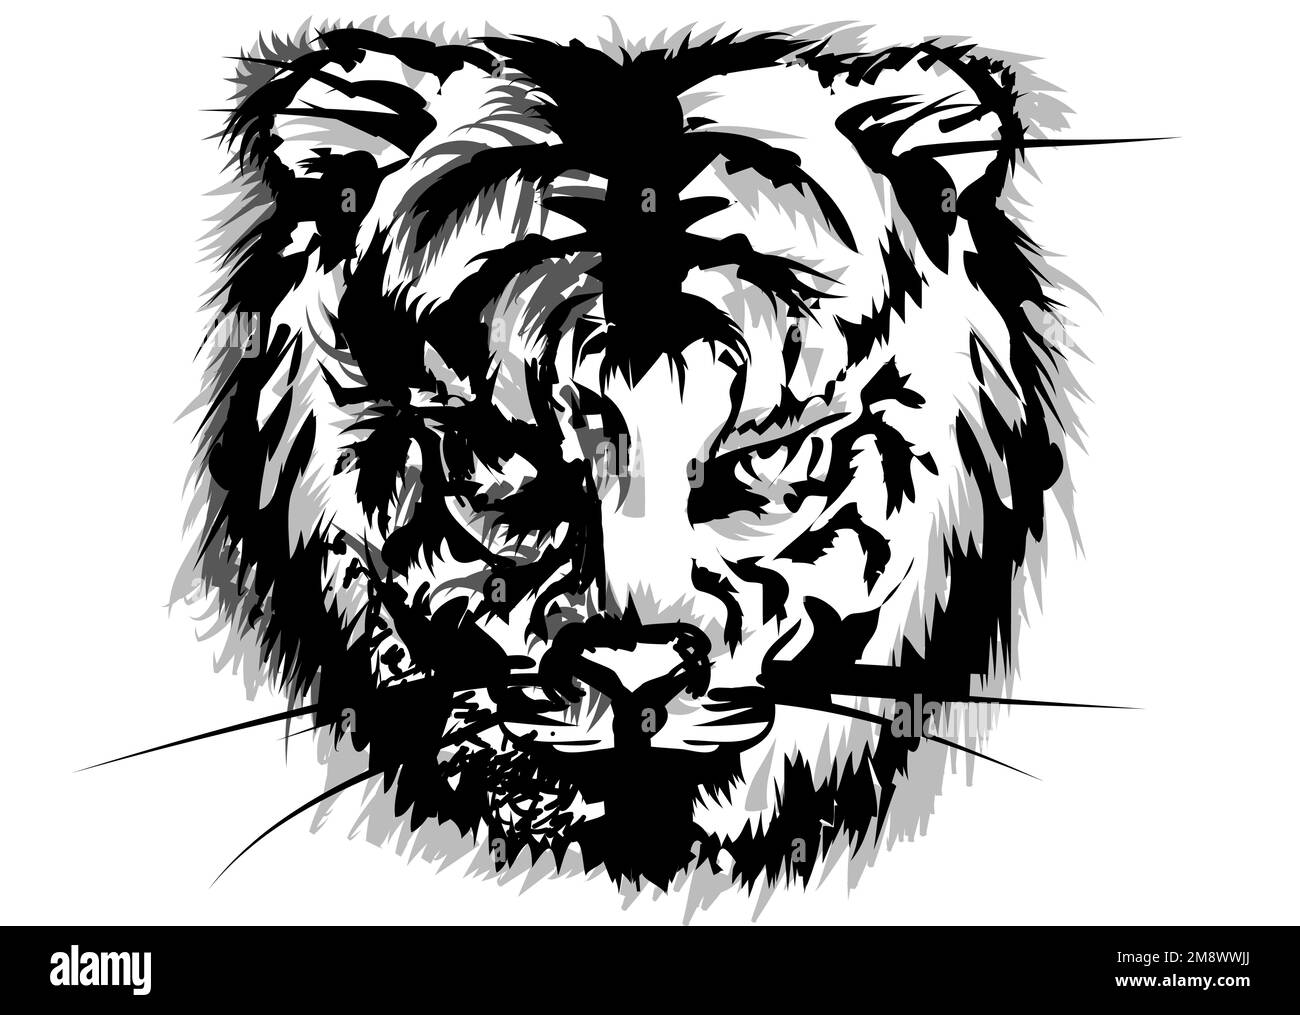 abstract tiger vector illustration isolated on white background Stock Vector